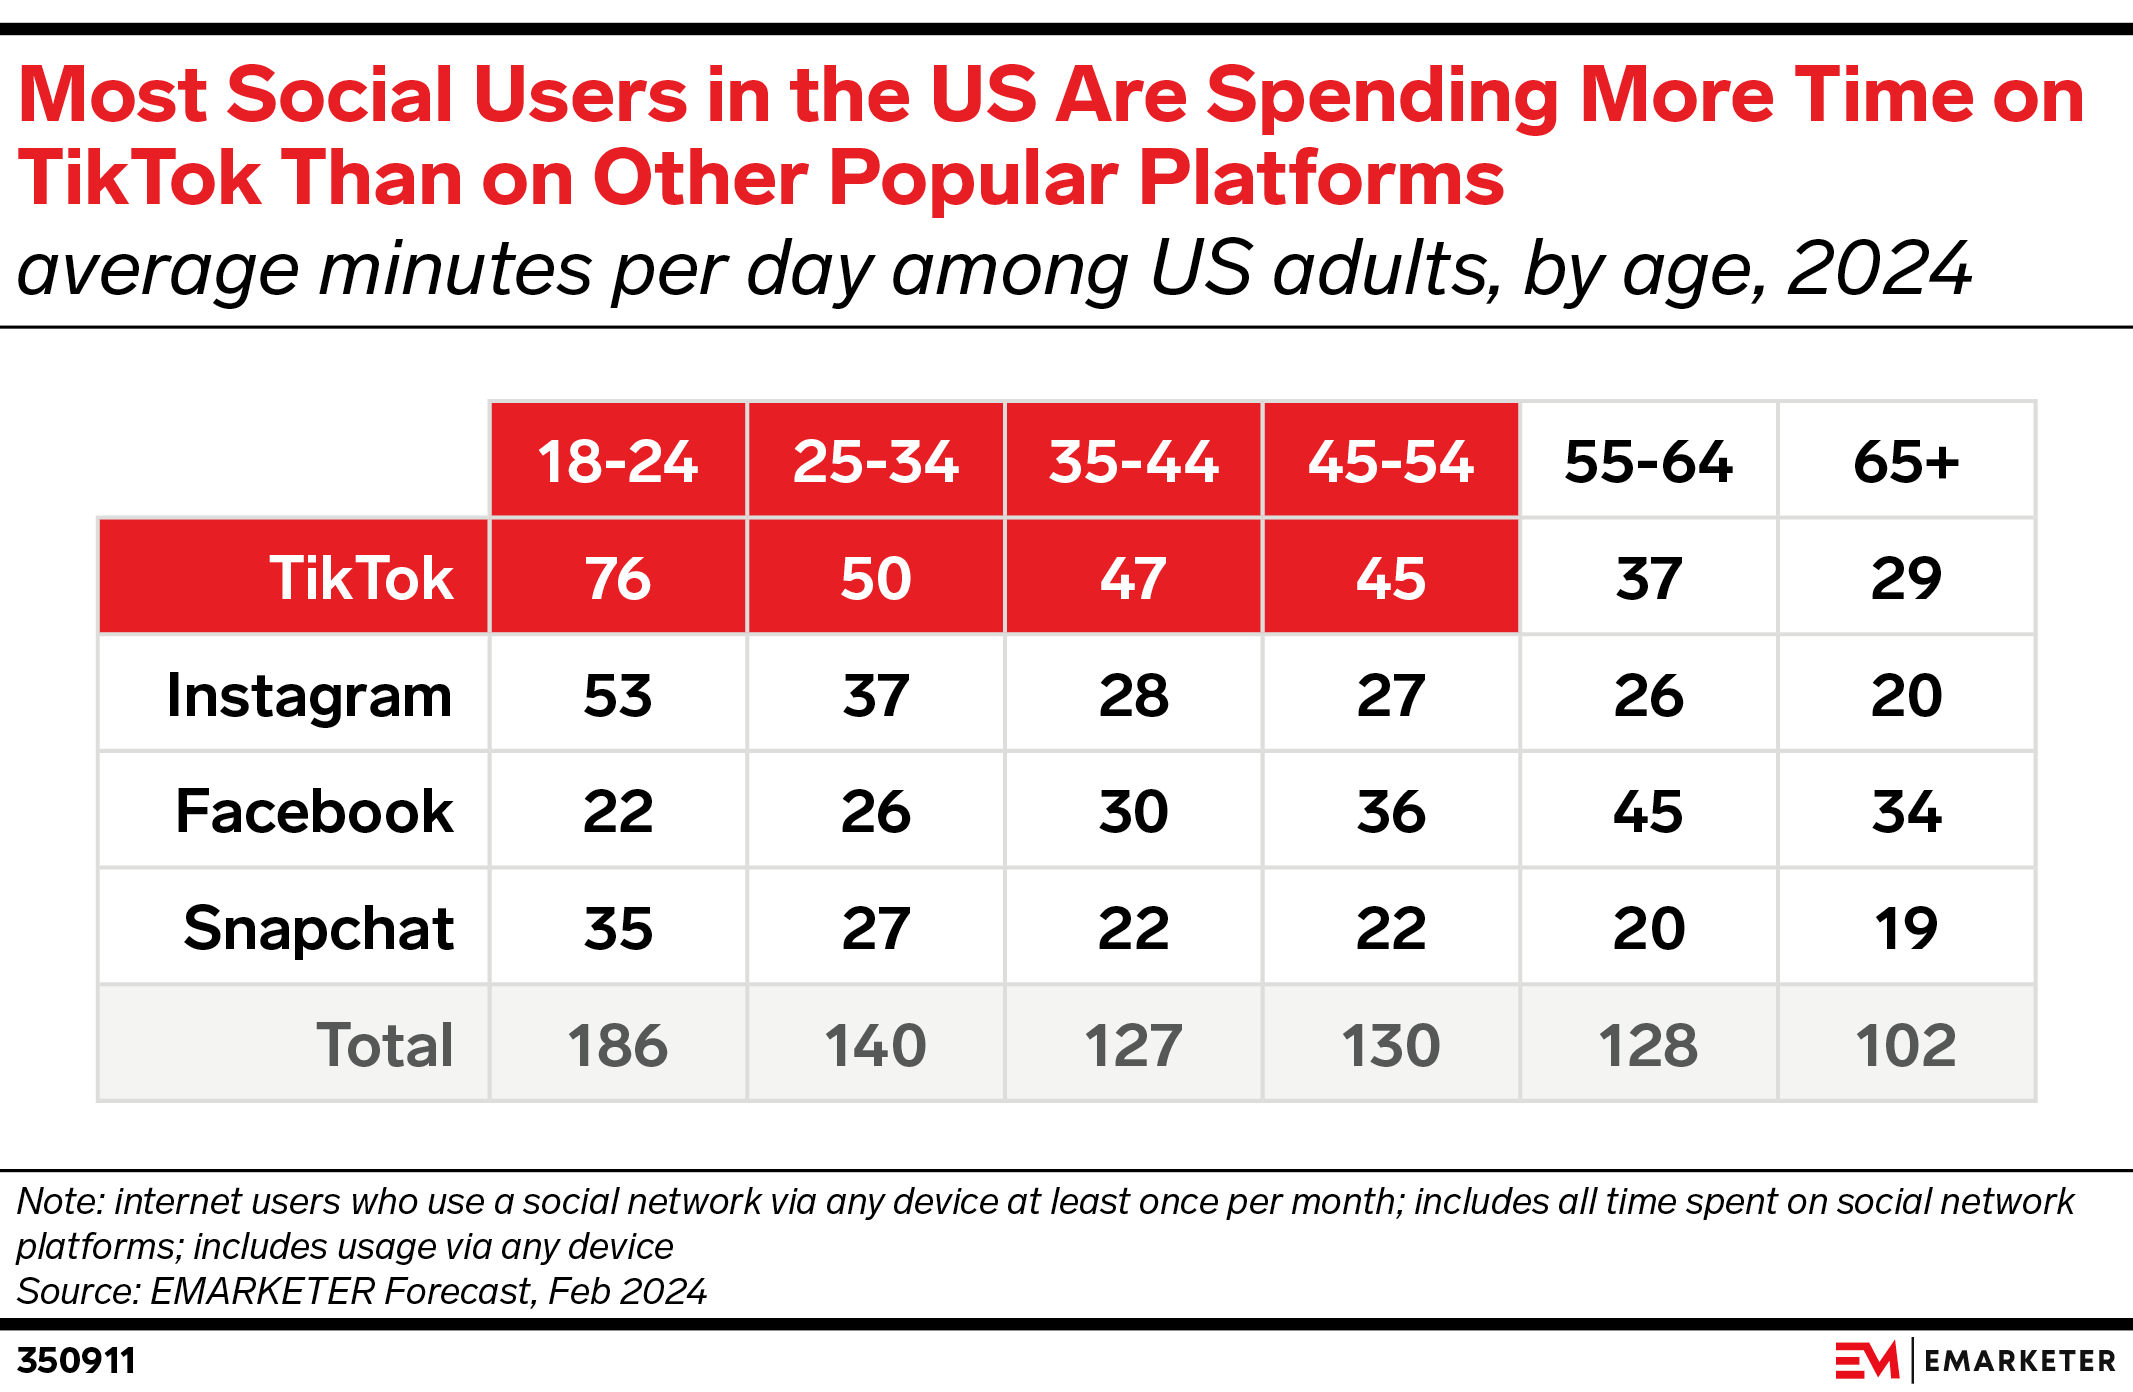 Most Social Users in US Are Spending More Time on TikTok Than Other Popular Platforms